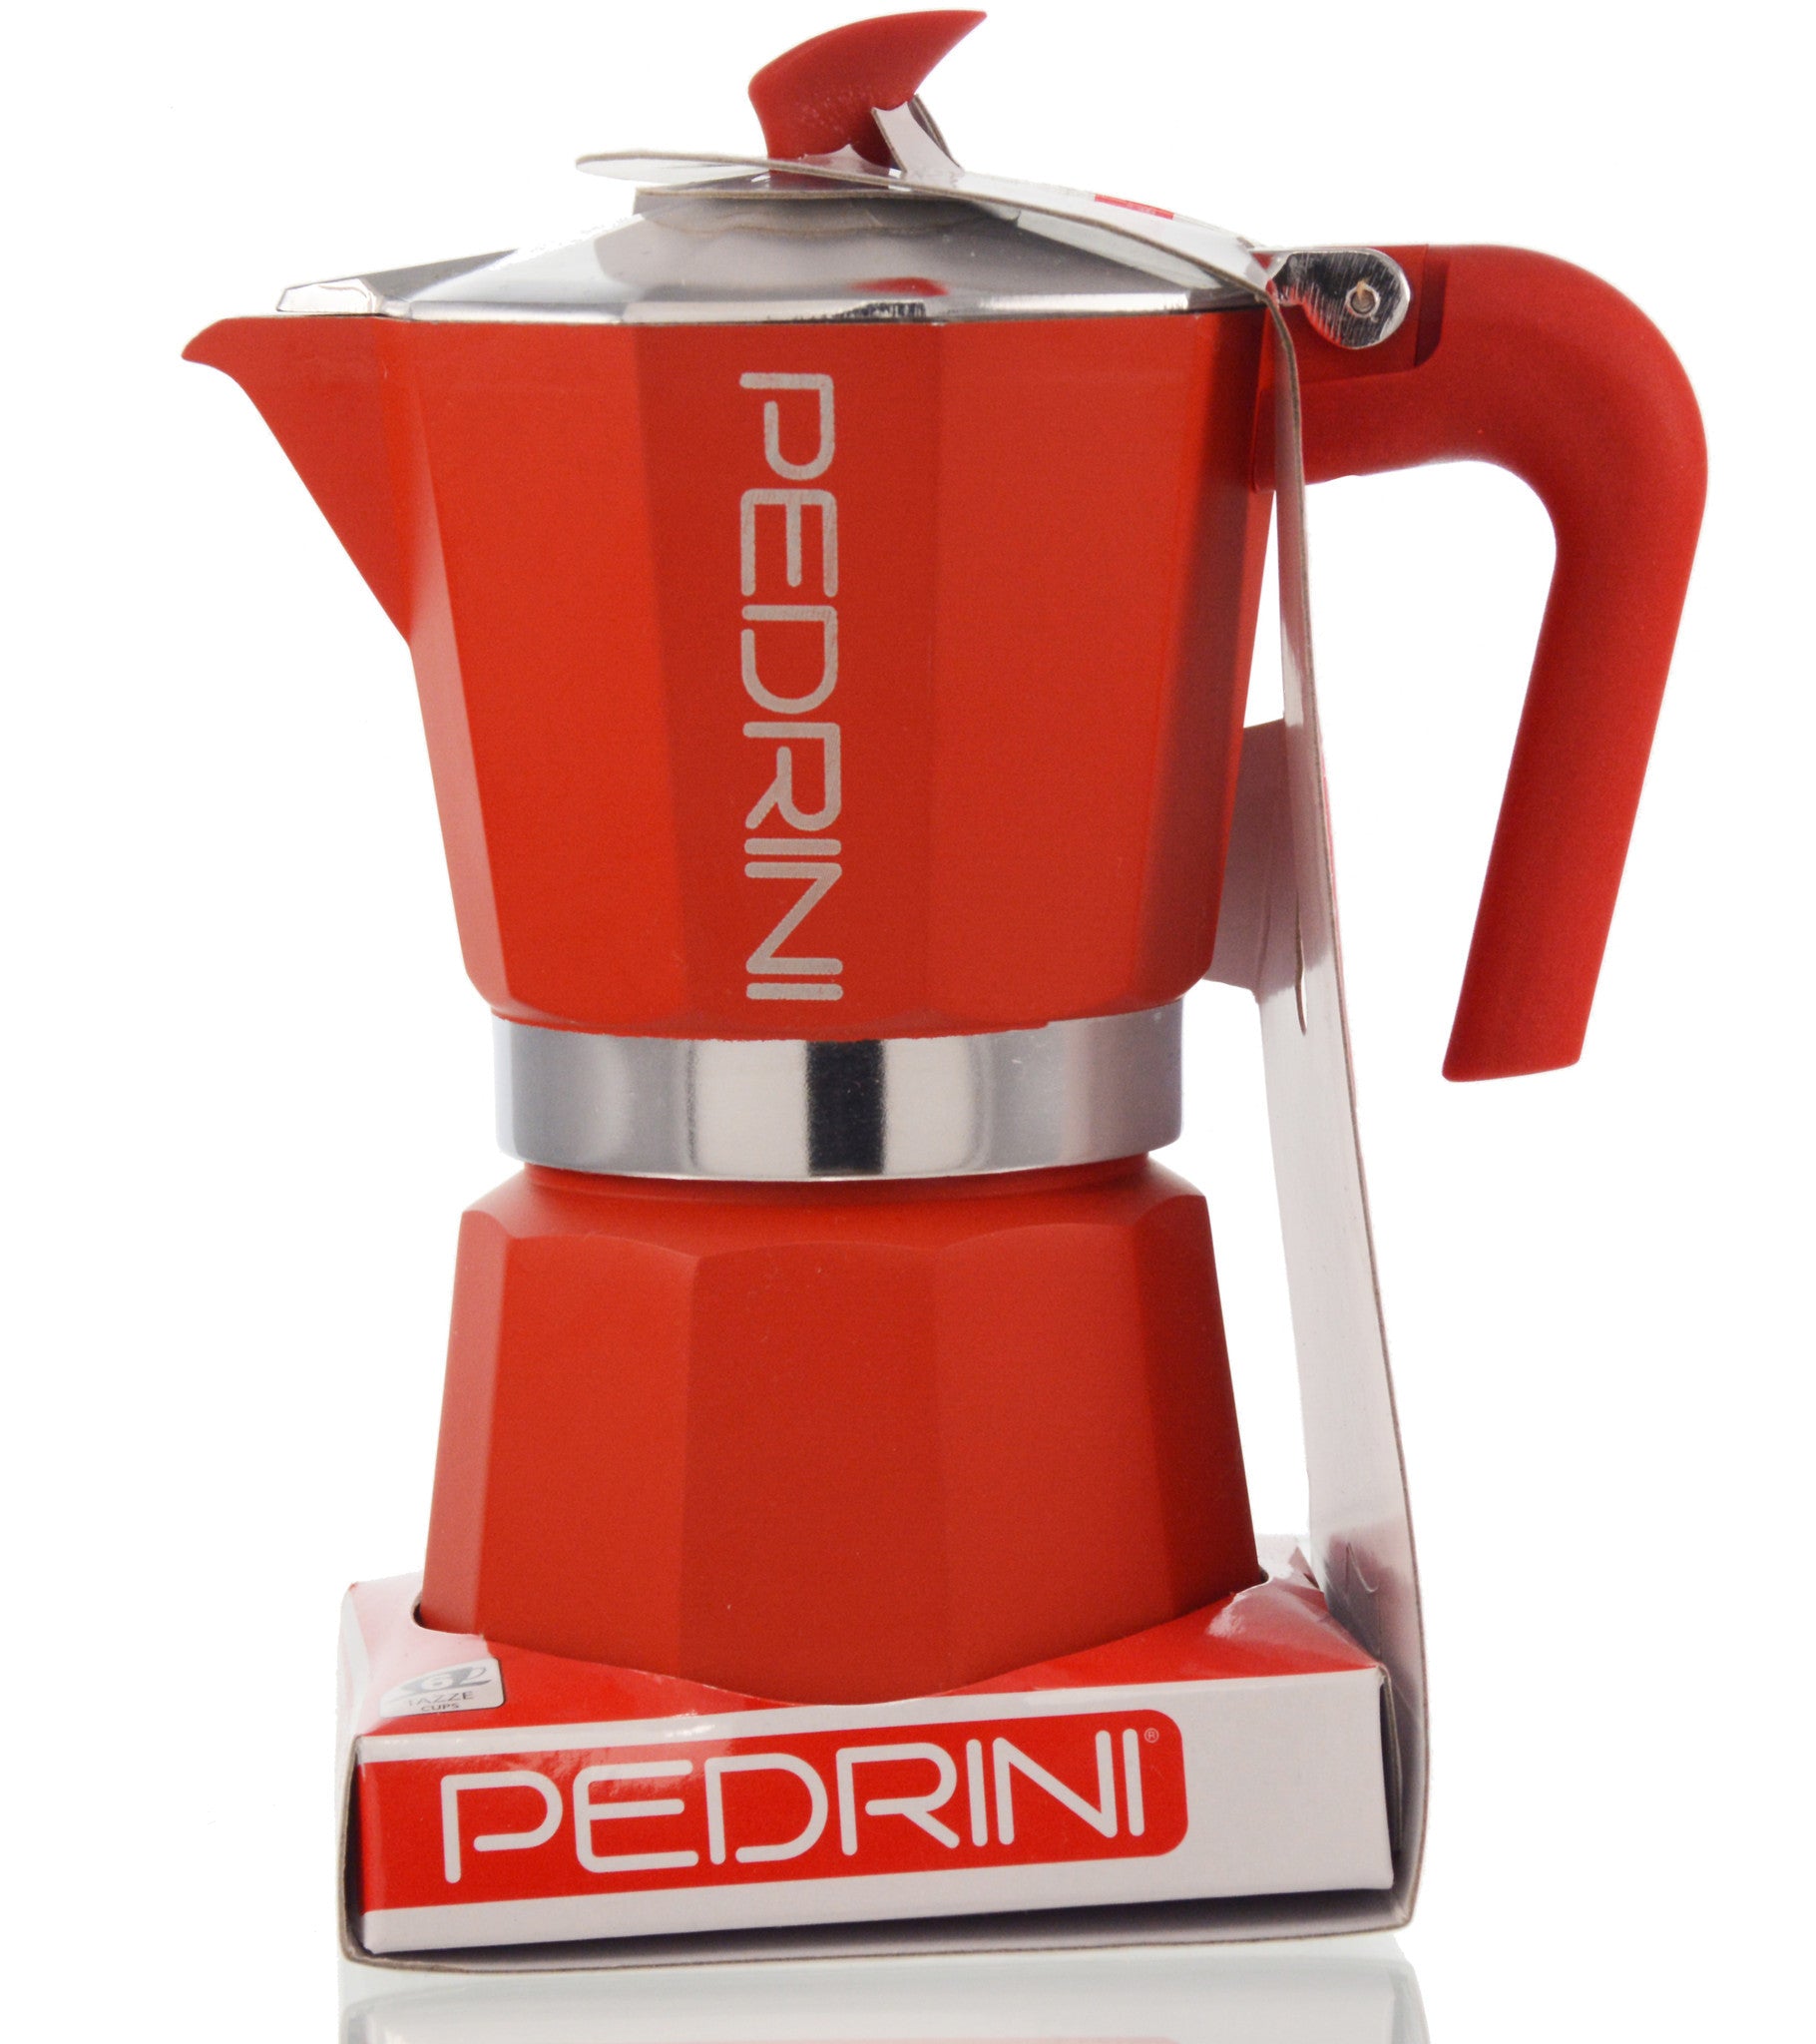 https://shopgrosche-test.myshopify.com/cdn/shop/products/Pedrini_Red_Espresso_maker_in_packaging_1_main_image.jpeg?v=1420735624